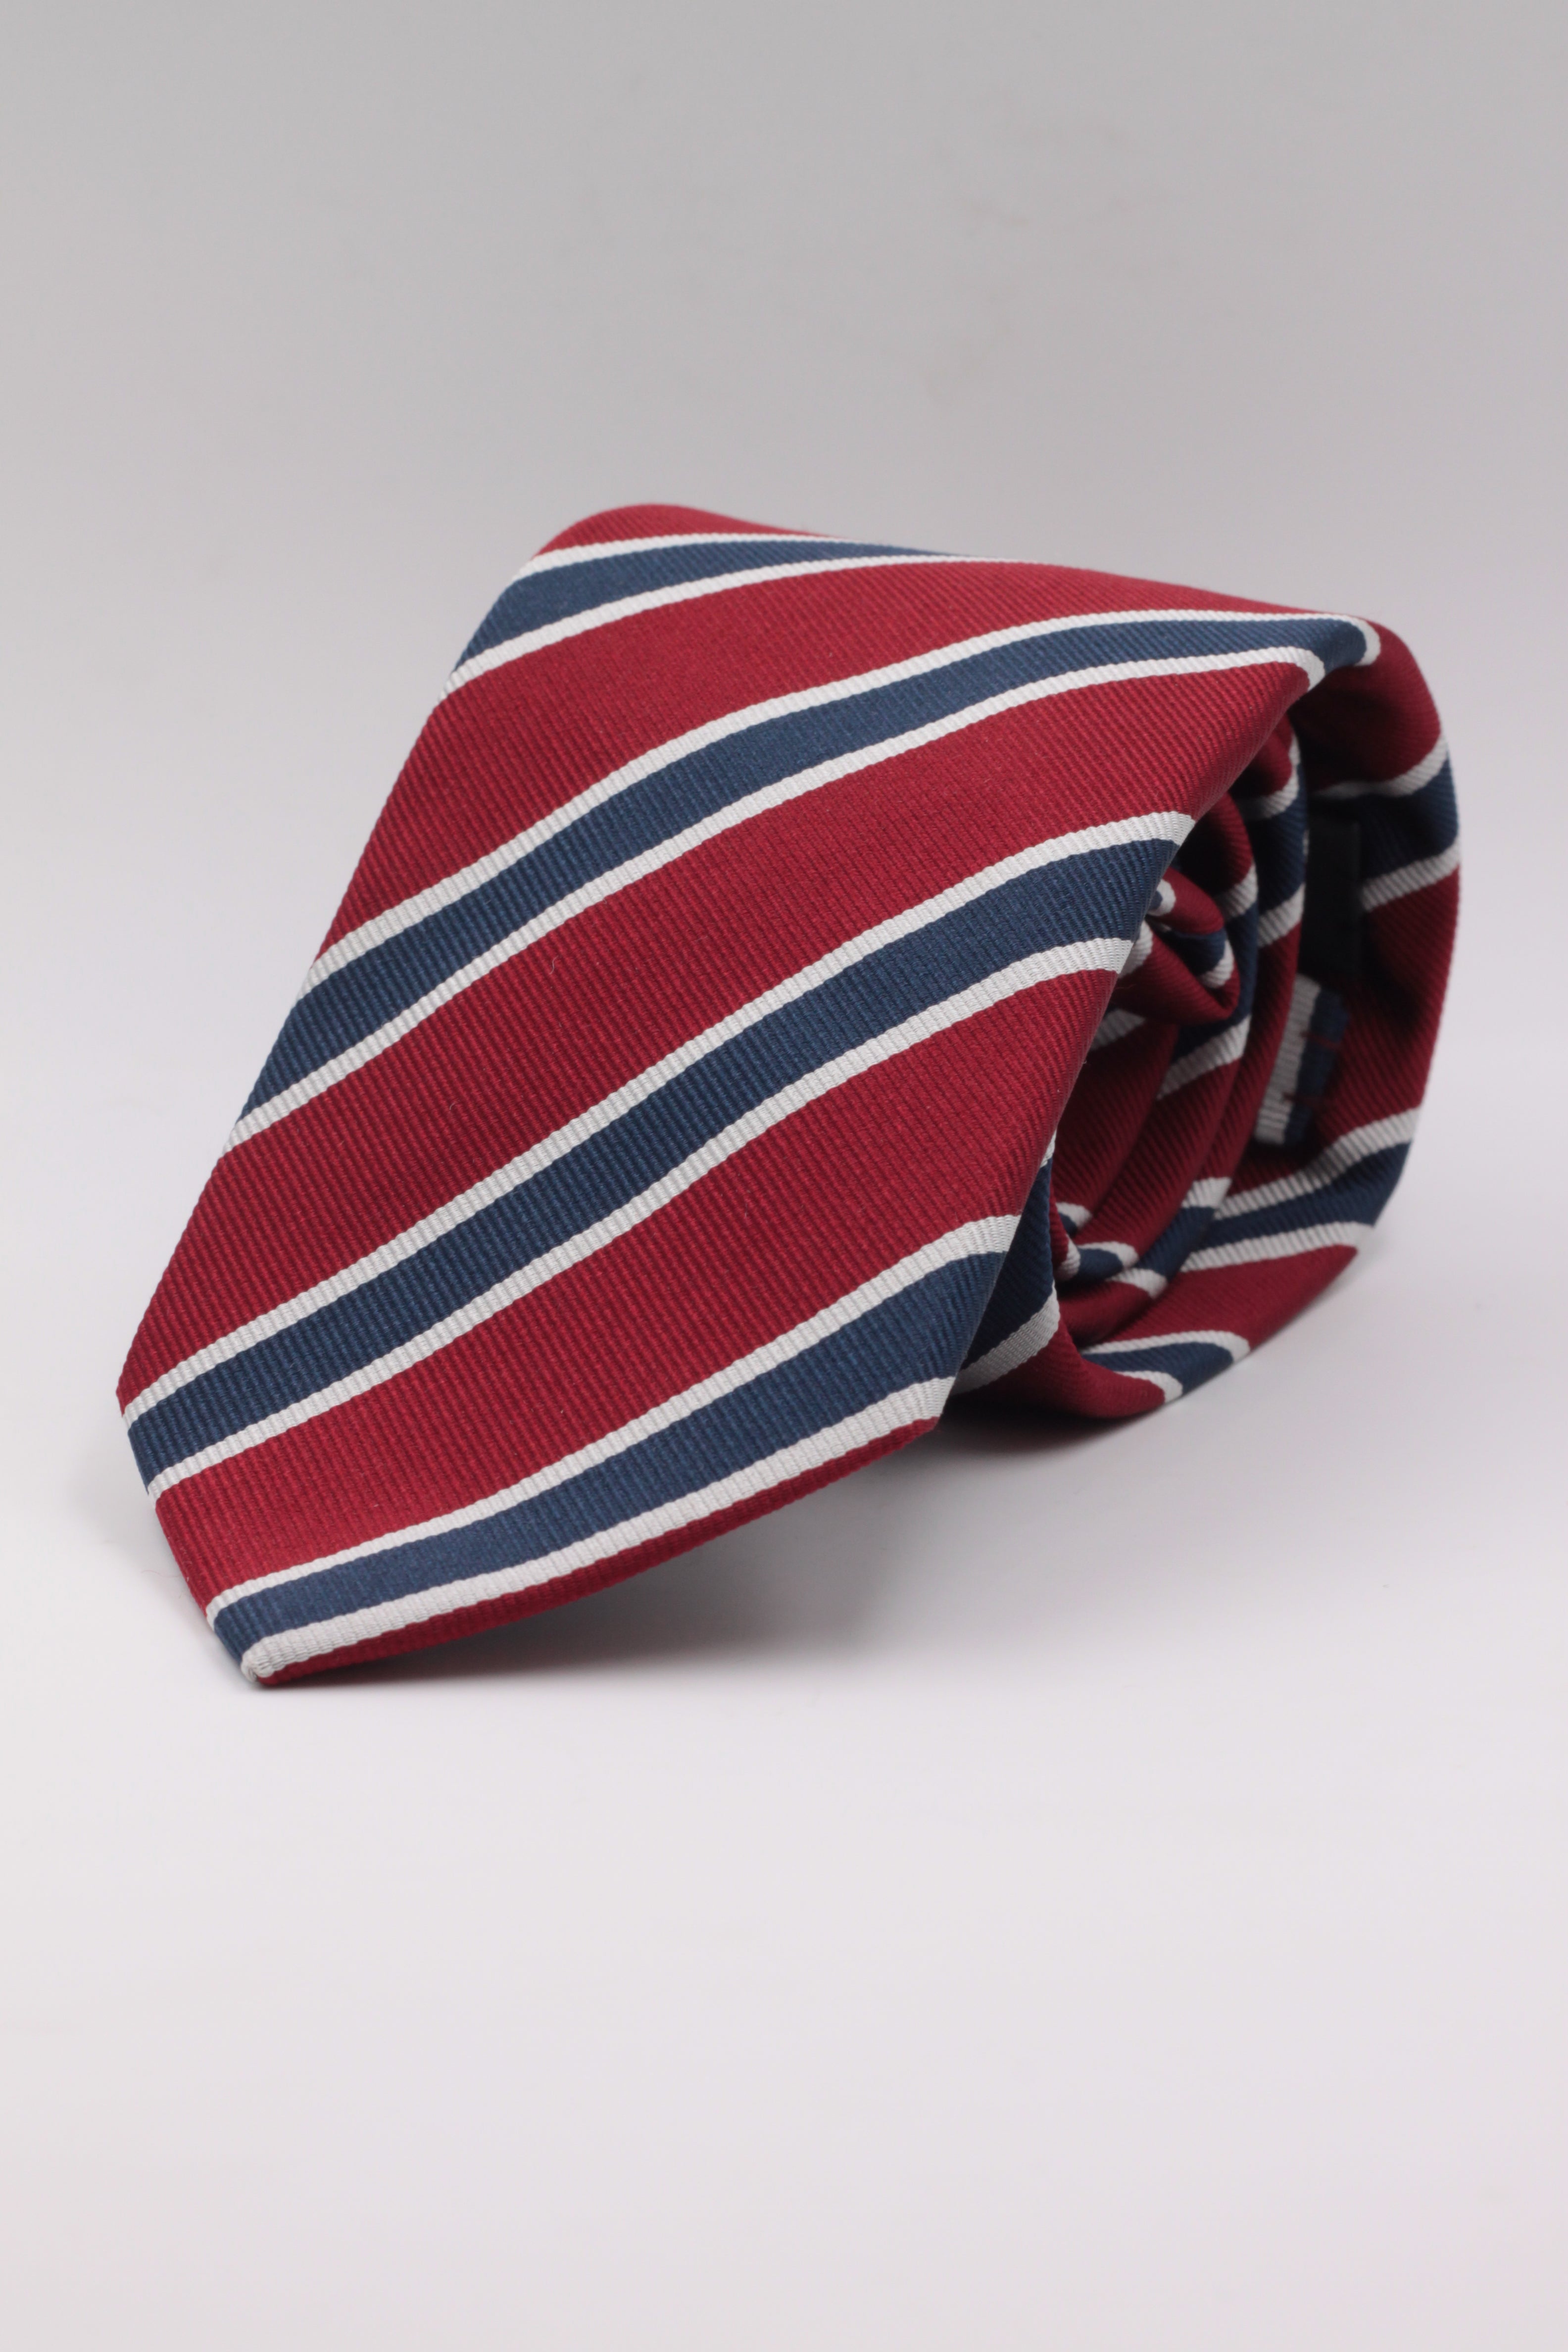 Red, Blue and white stripe tie